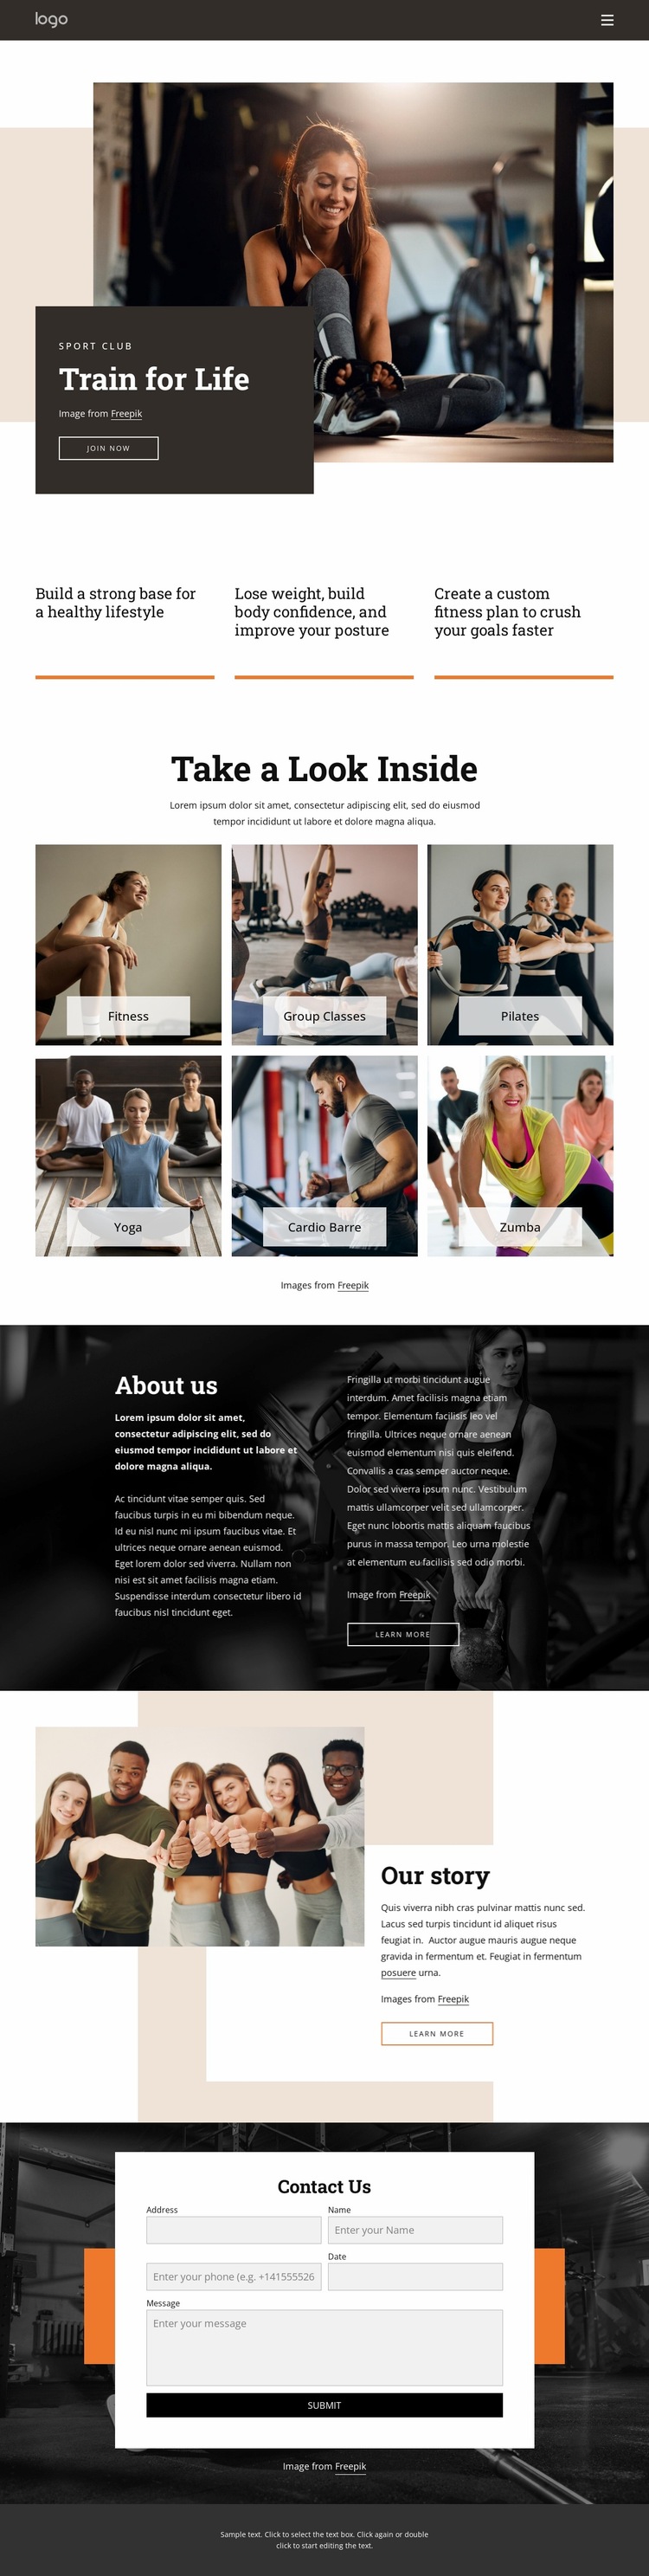 Get moving with our range of classes Website Builder Templates